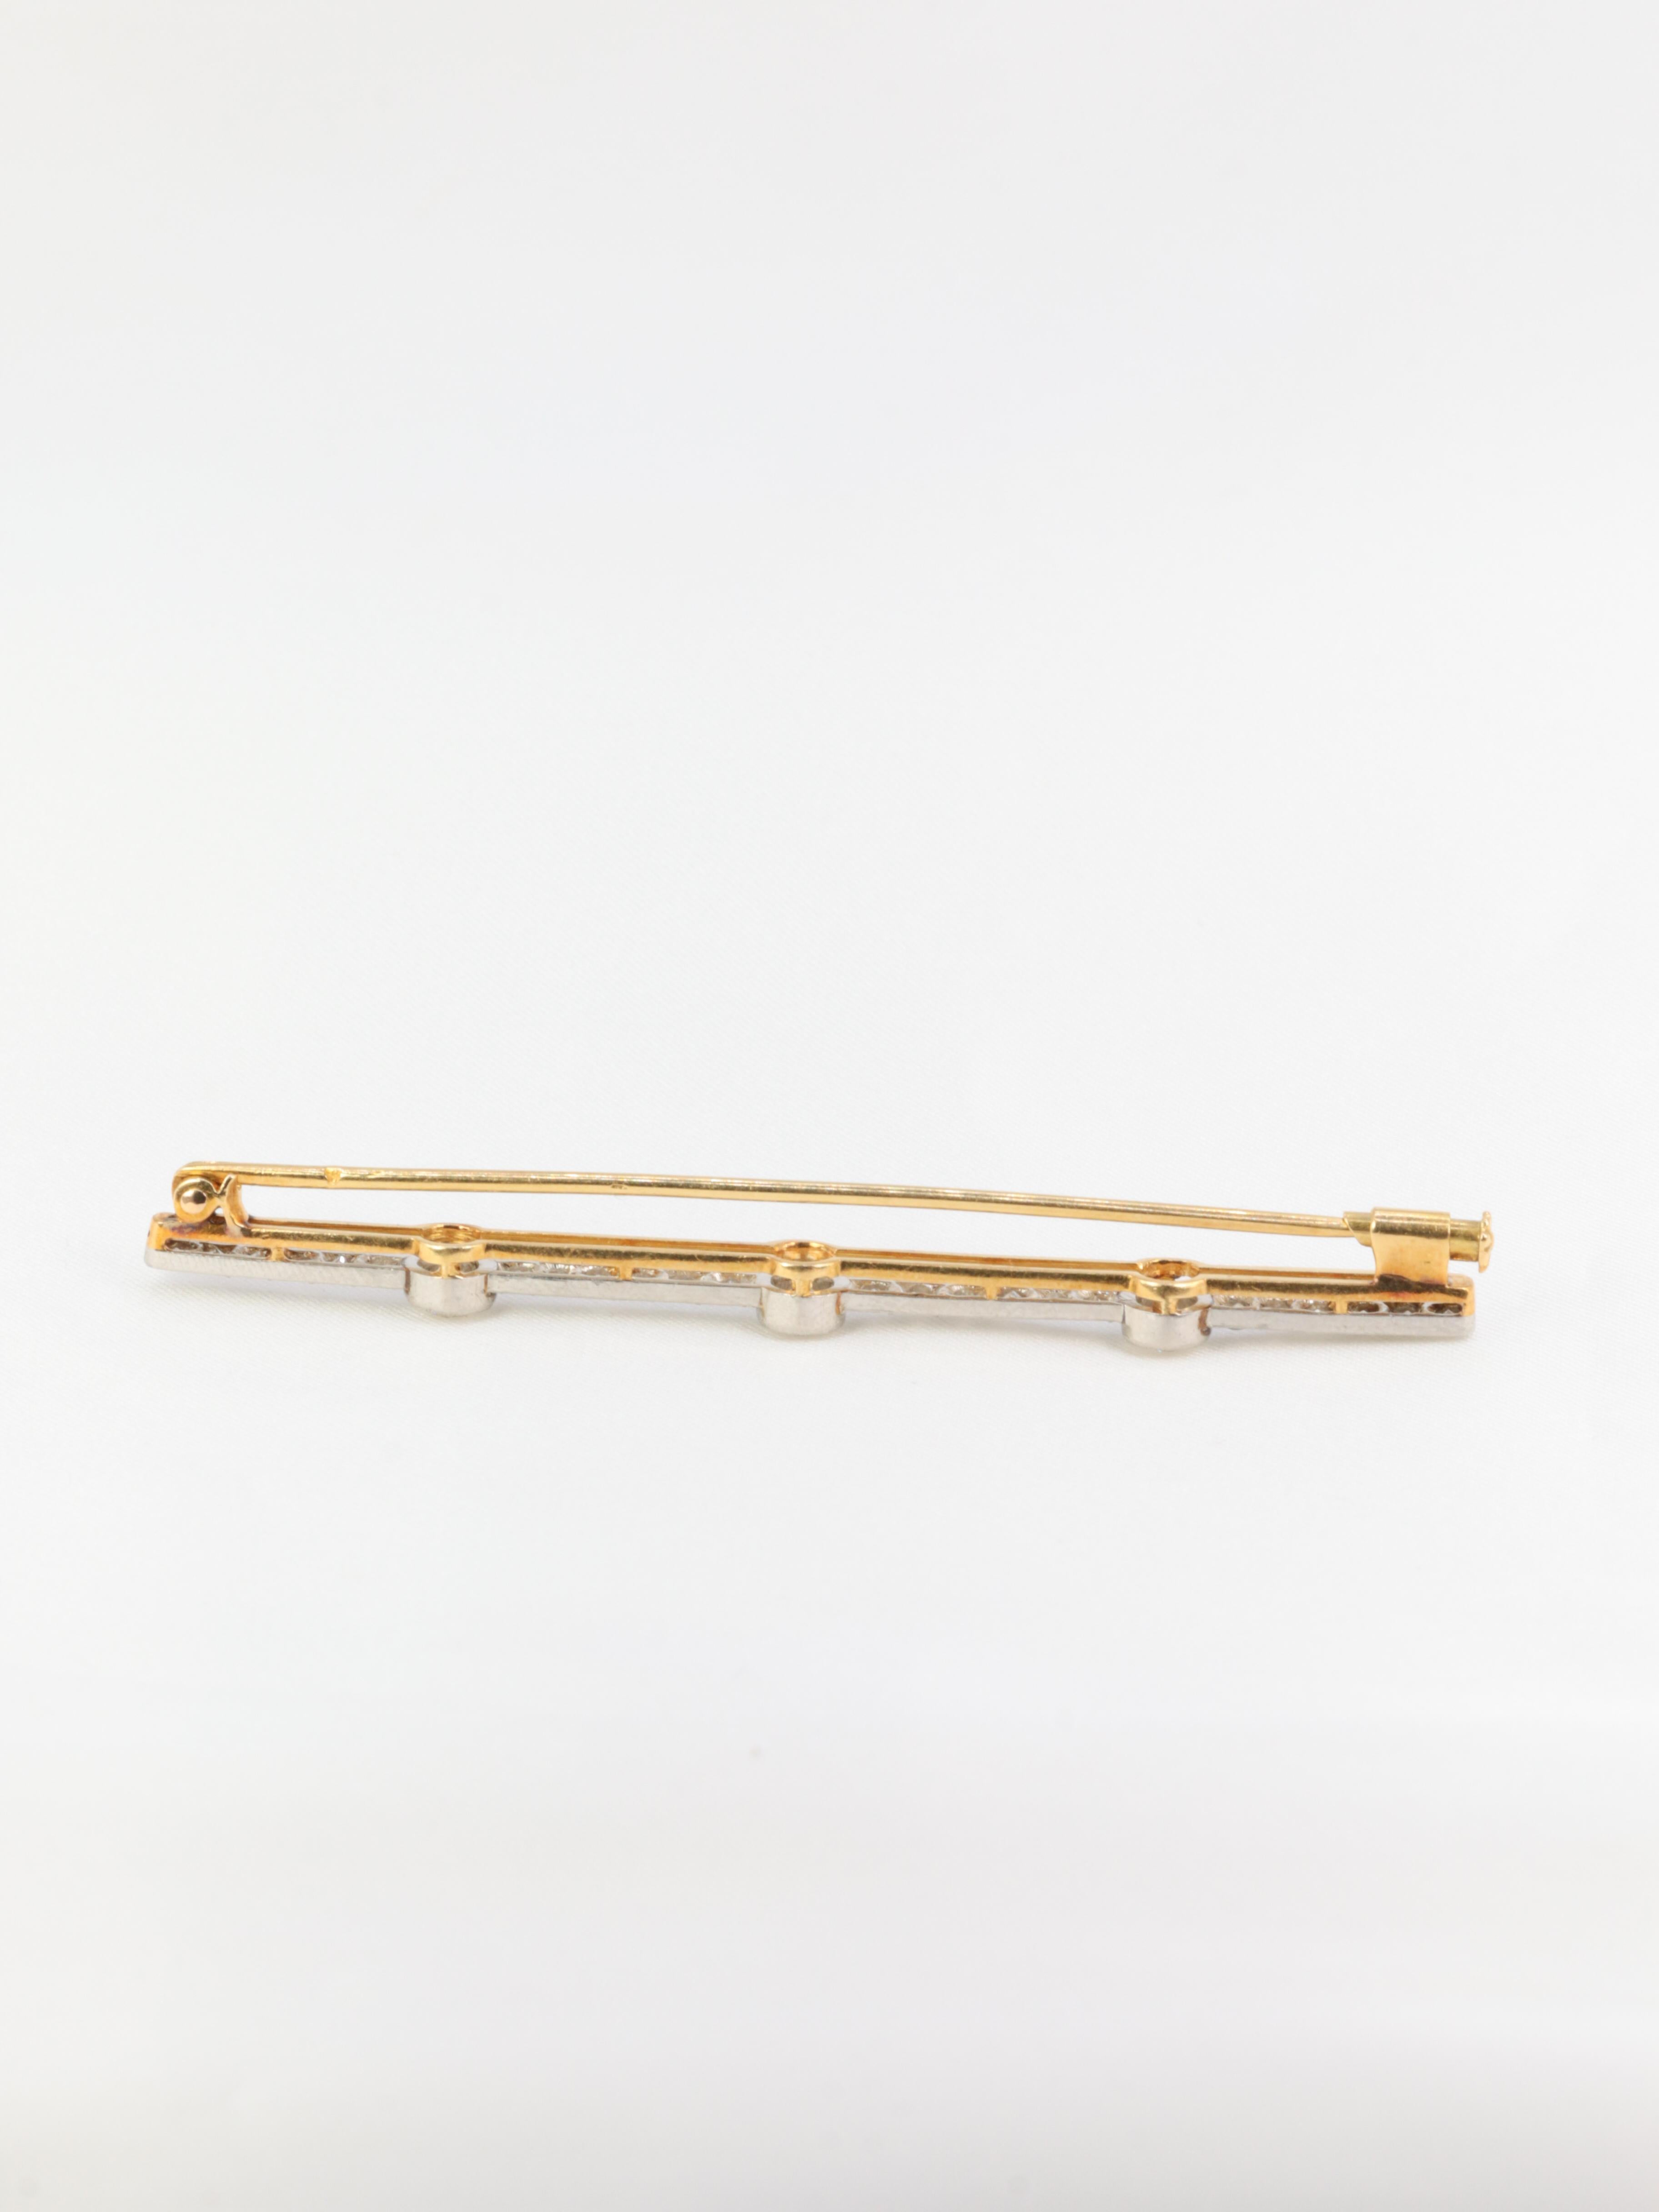 Antique Barrette Brooch in Gold, Platinum and Diamonds In Good Condition For Sale In PARIS, FR